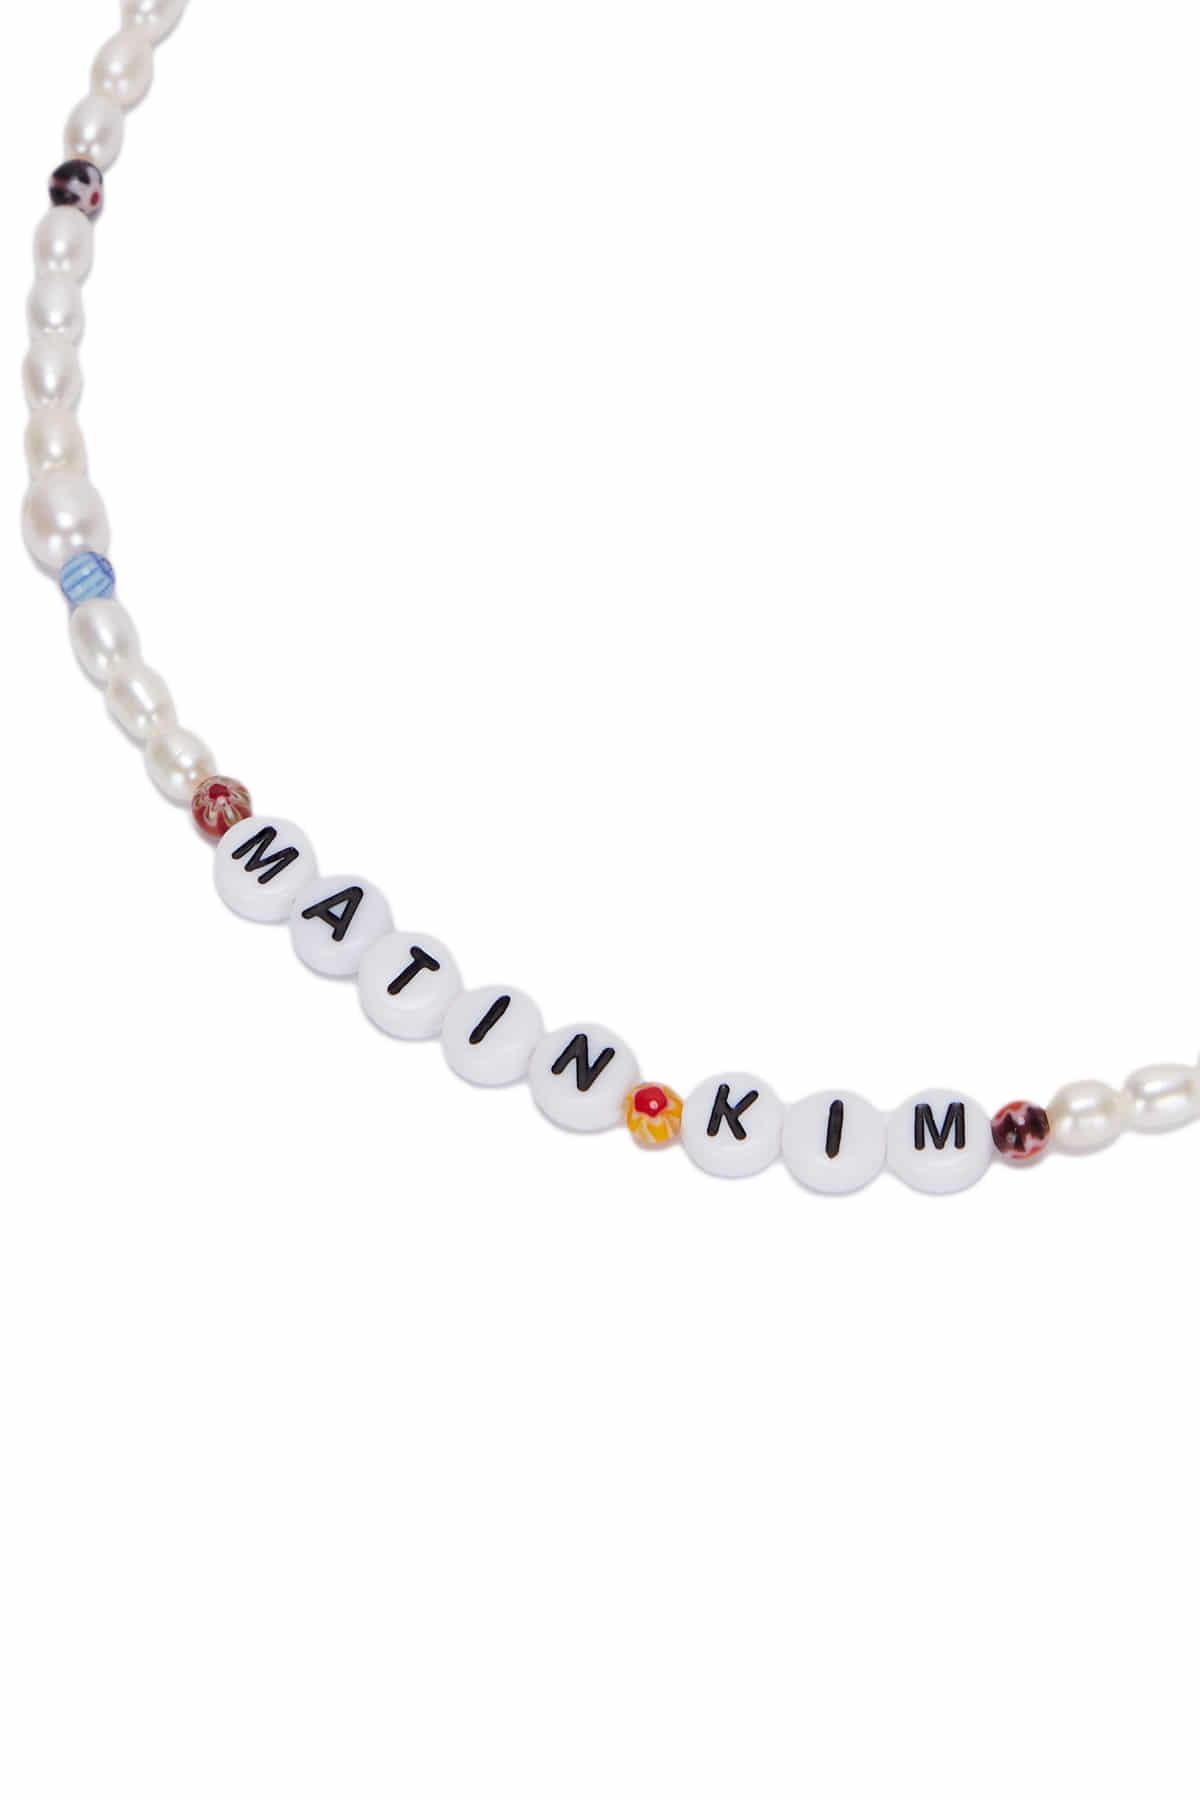 MATIN KIM BEADS NECKLACE IN MIX